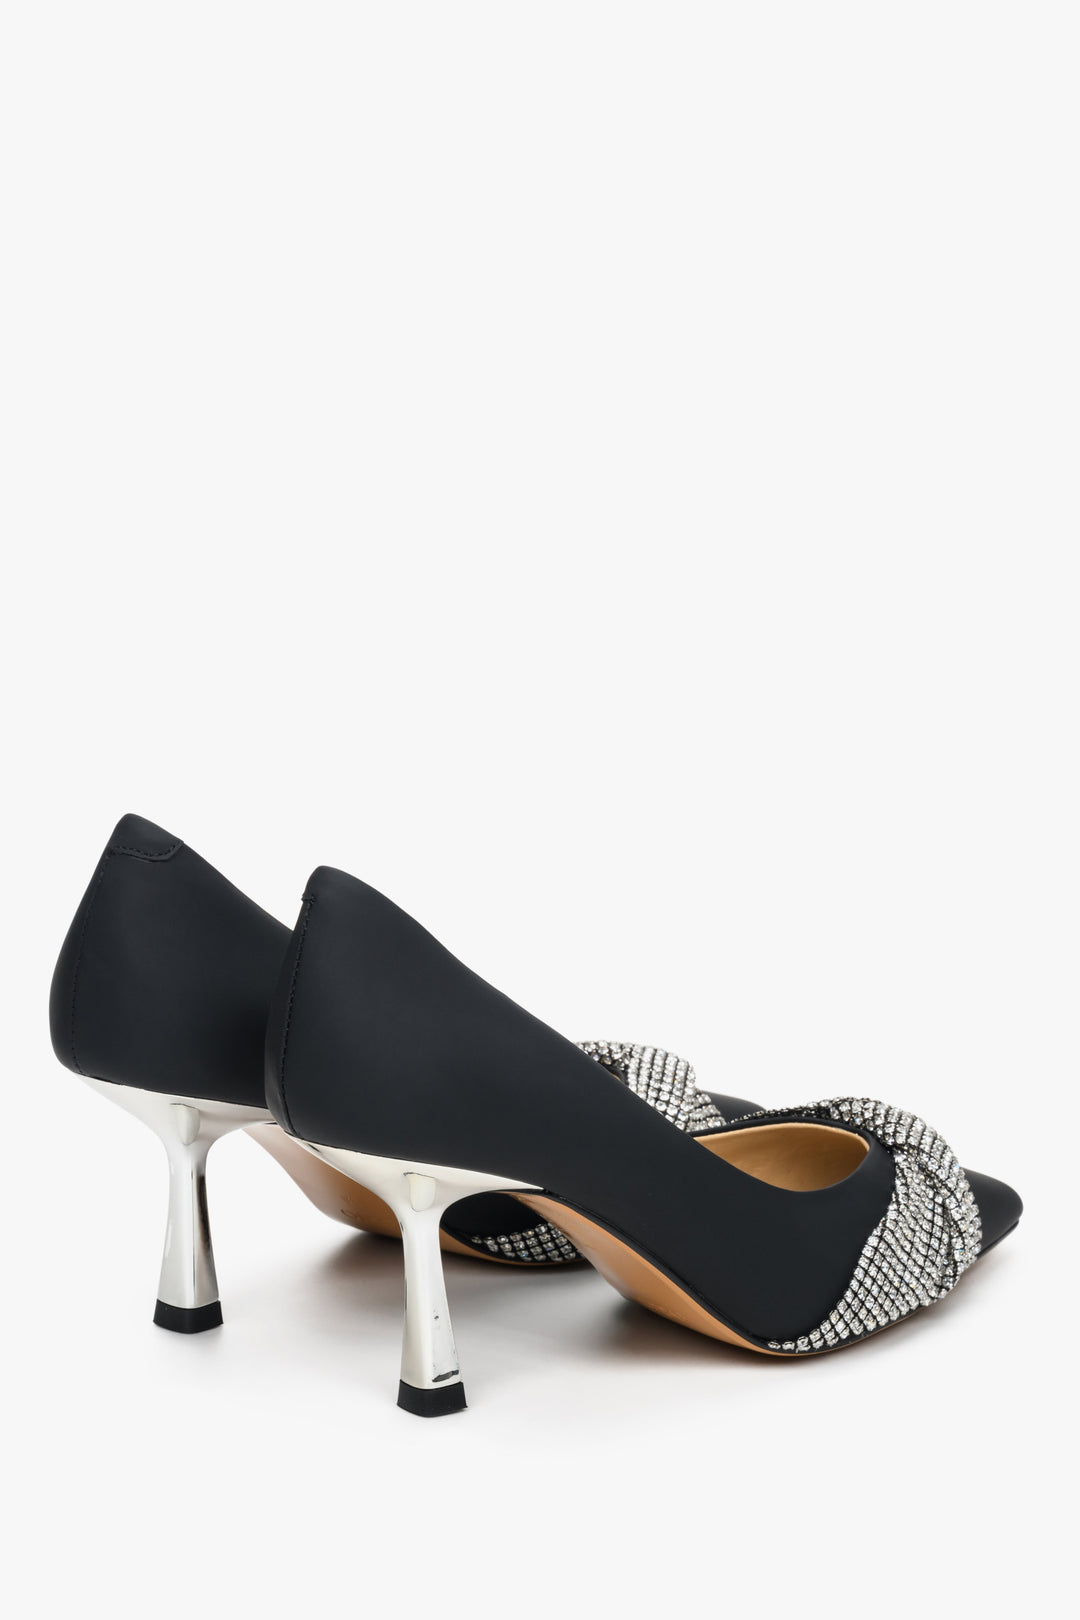 Women's black leather stilettos with silver accents by Estro.